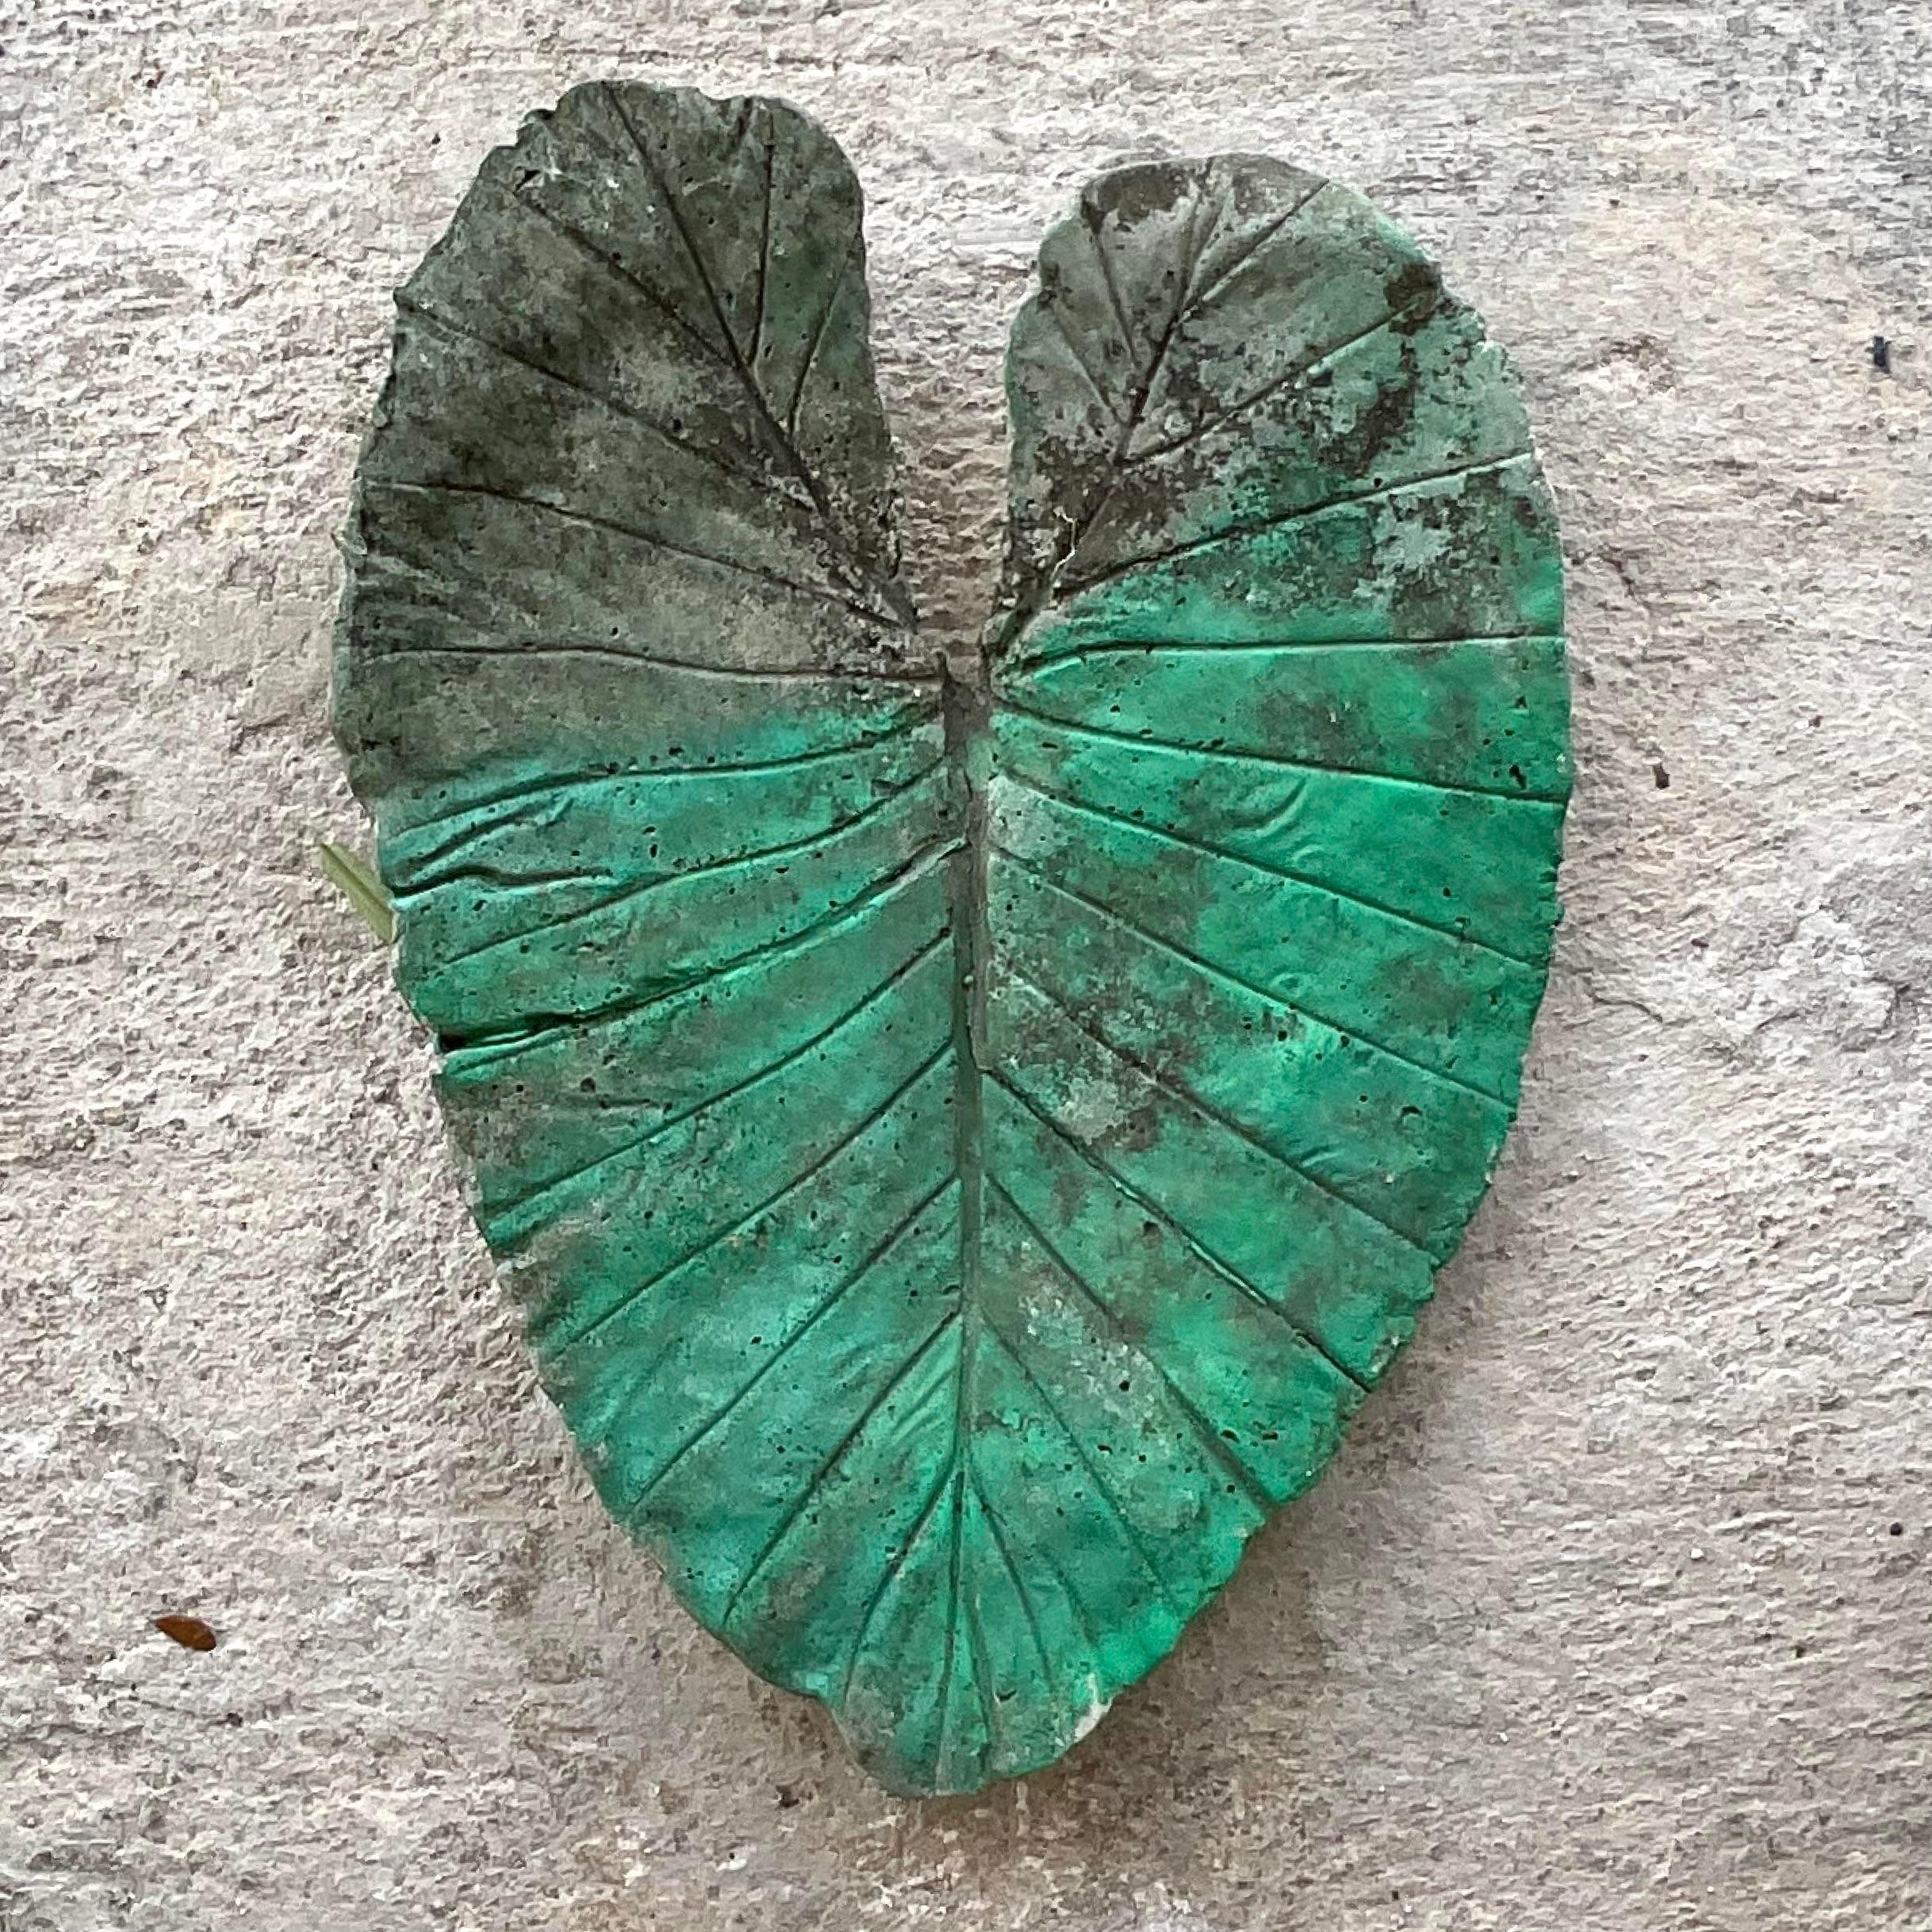 A stunning vintage Boho Elephant Ear leaf. Made in a heavy cast concrete and hand painted a Kelly bright green. Makes a fabulous centerpiece on your outdoor table or a chic garden ornament. Acquired from a Palm Beach estate.